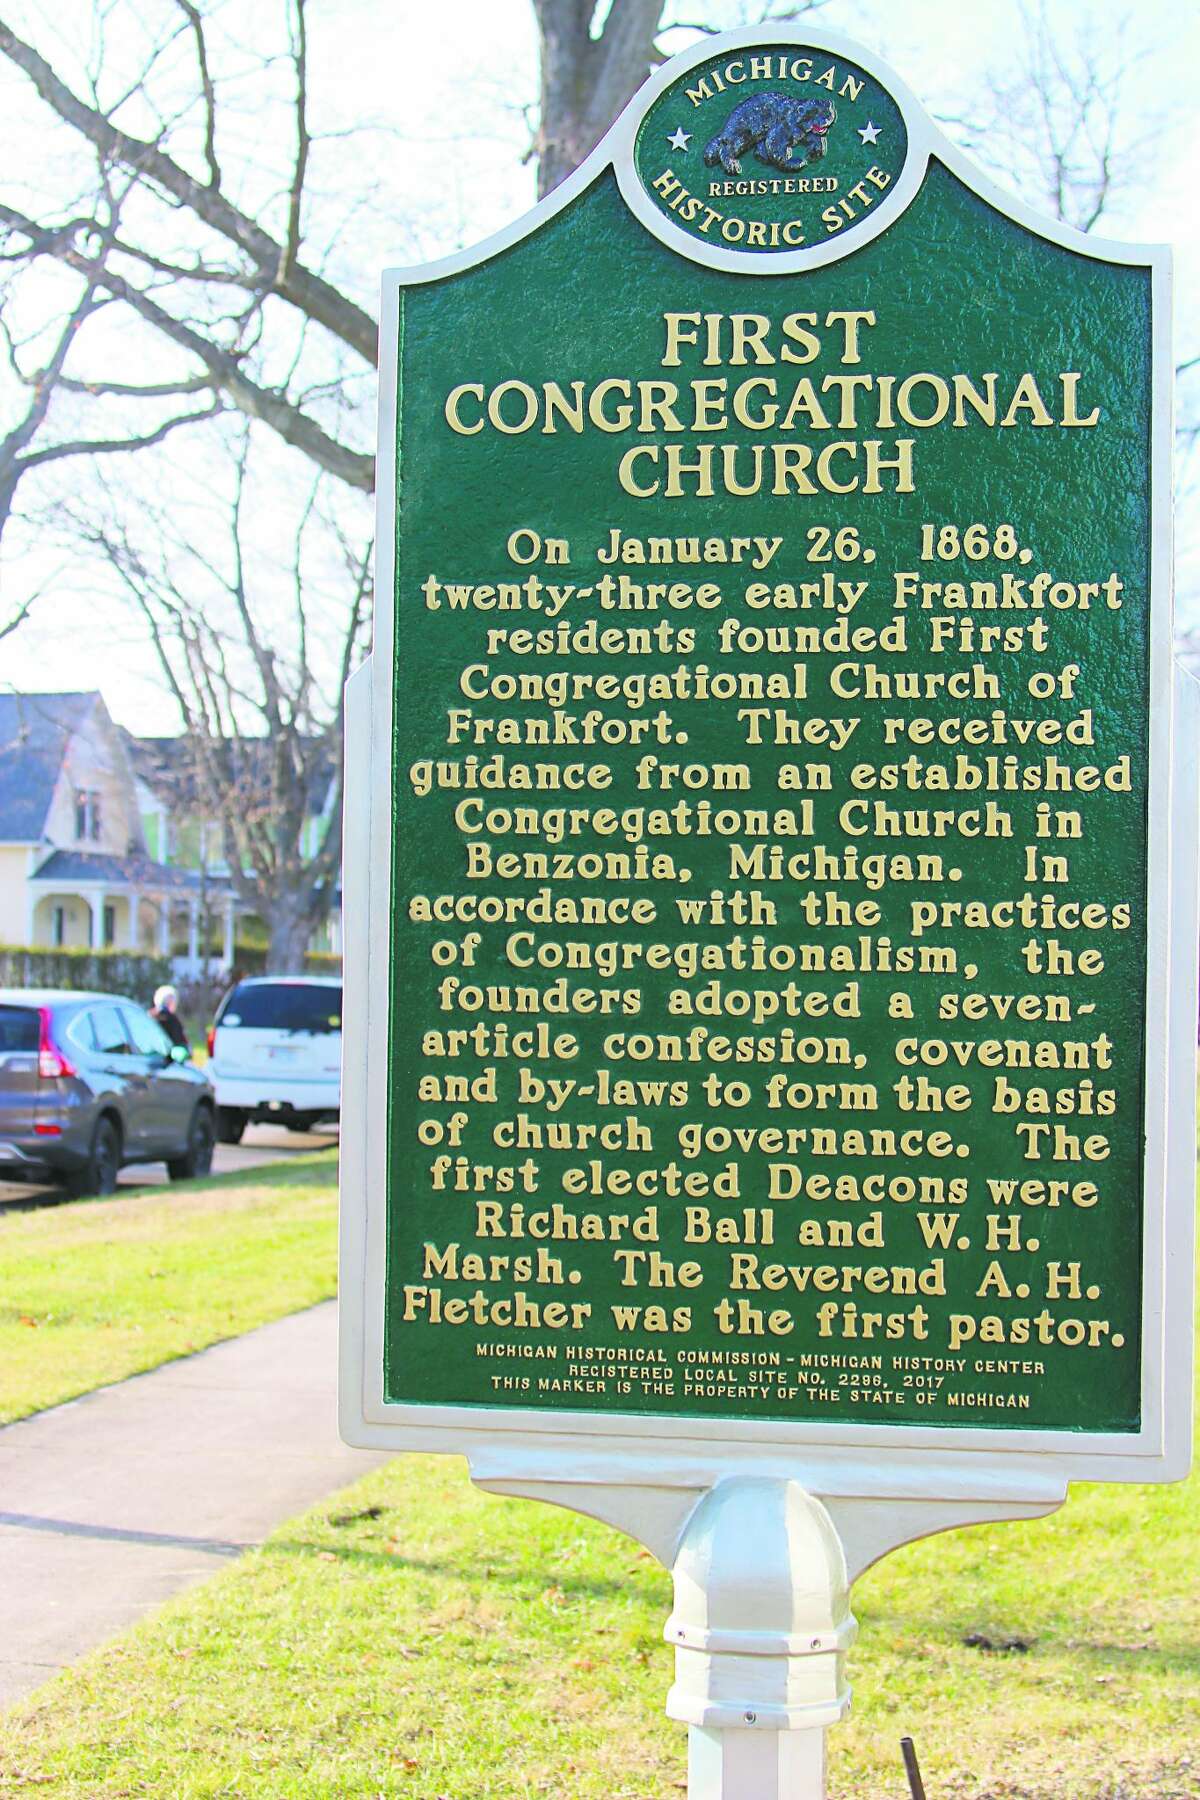 The First Congregational Church of Frankfort was named a registered state historical site, and the sign designating it as such was erected on the same day of the Silver Tea.